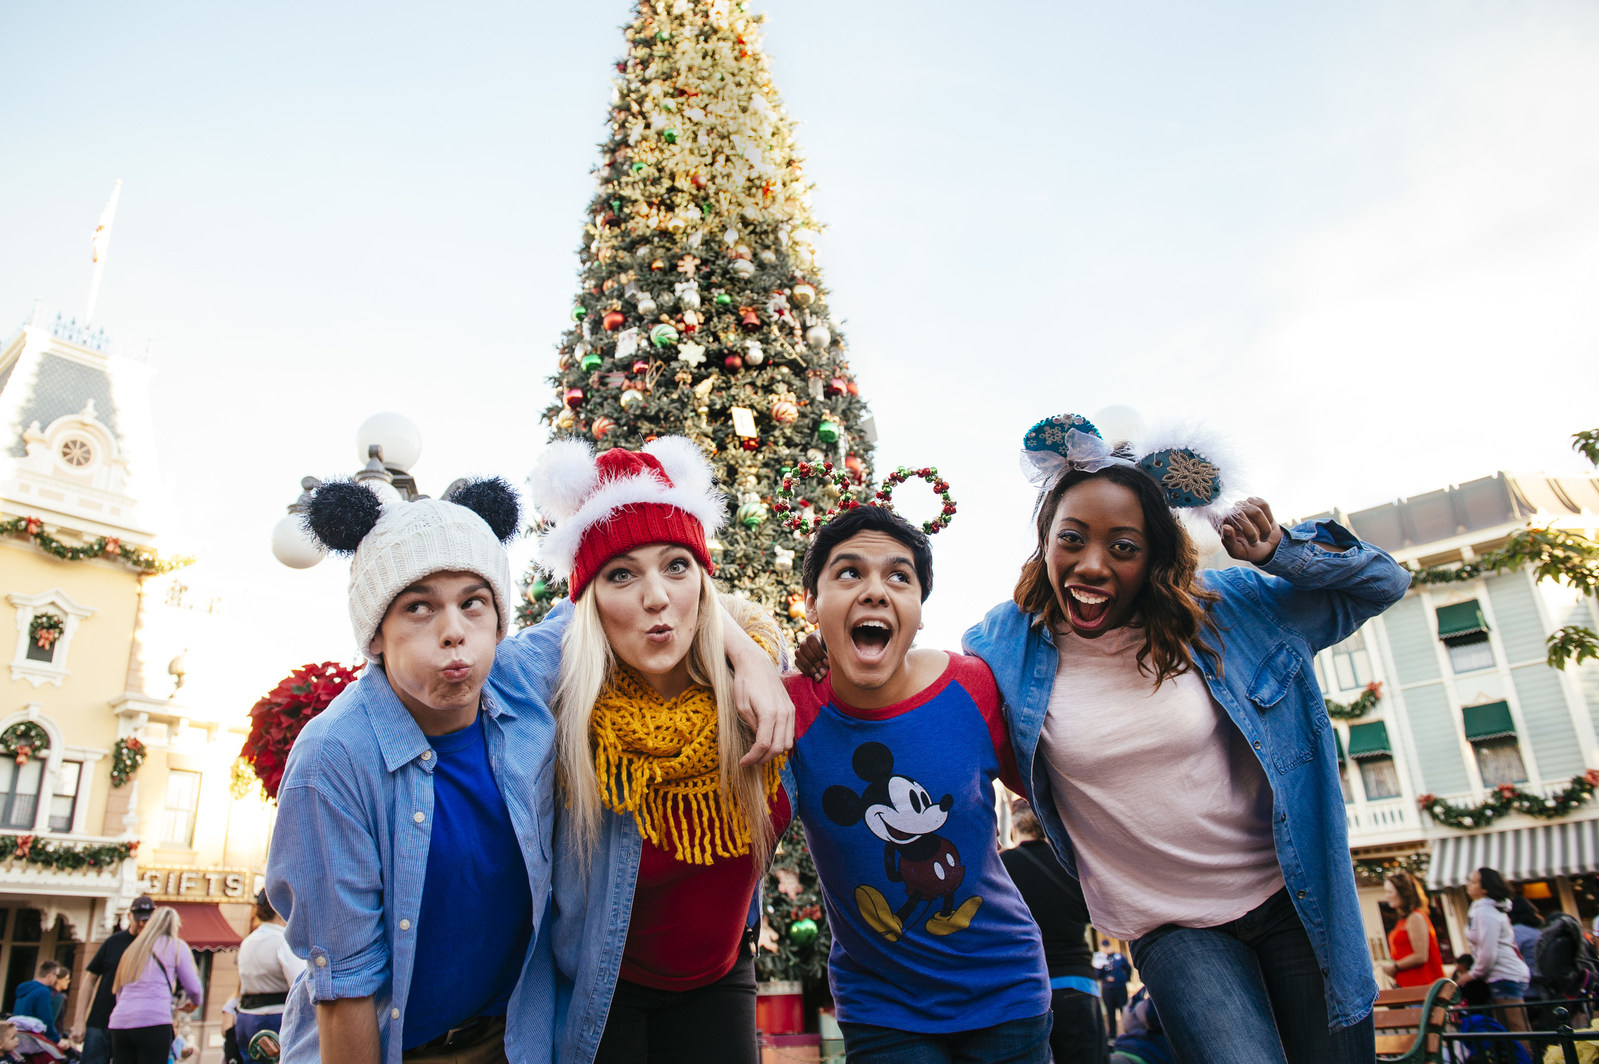 Disney Parks will donate $5 to Make-A-Wish®, up to a total of $1 million, for each photo taken and shared featuring Mickey Mouse Ears  or any creative ears at all  with the hashtag #ShareYourEars. Photos can be uploaded to Facebook, Twitter or Instagram between now and December 25, 2017.